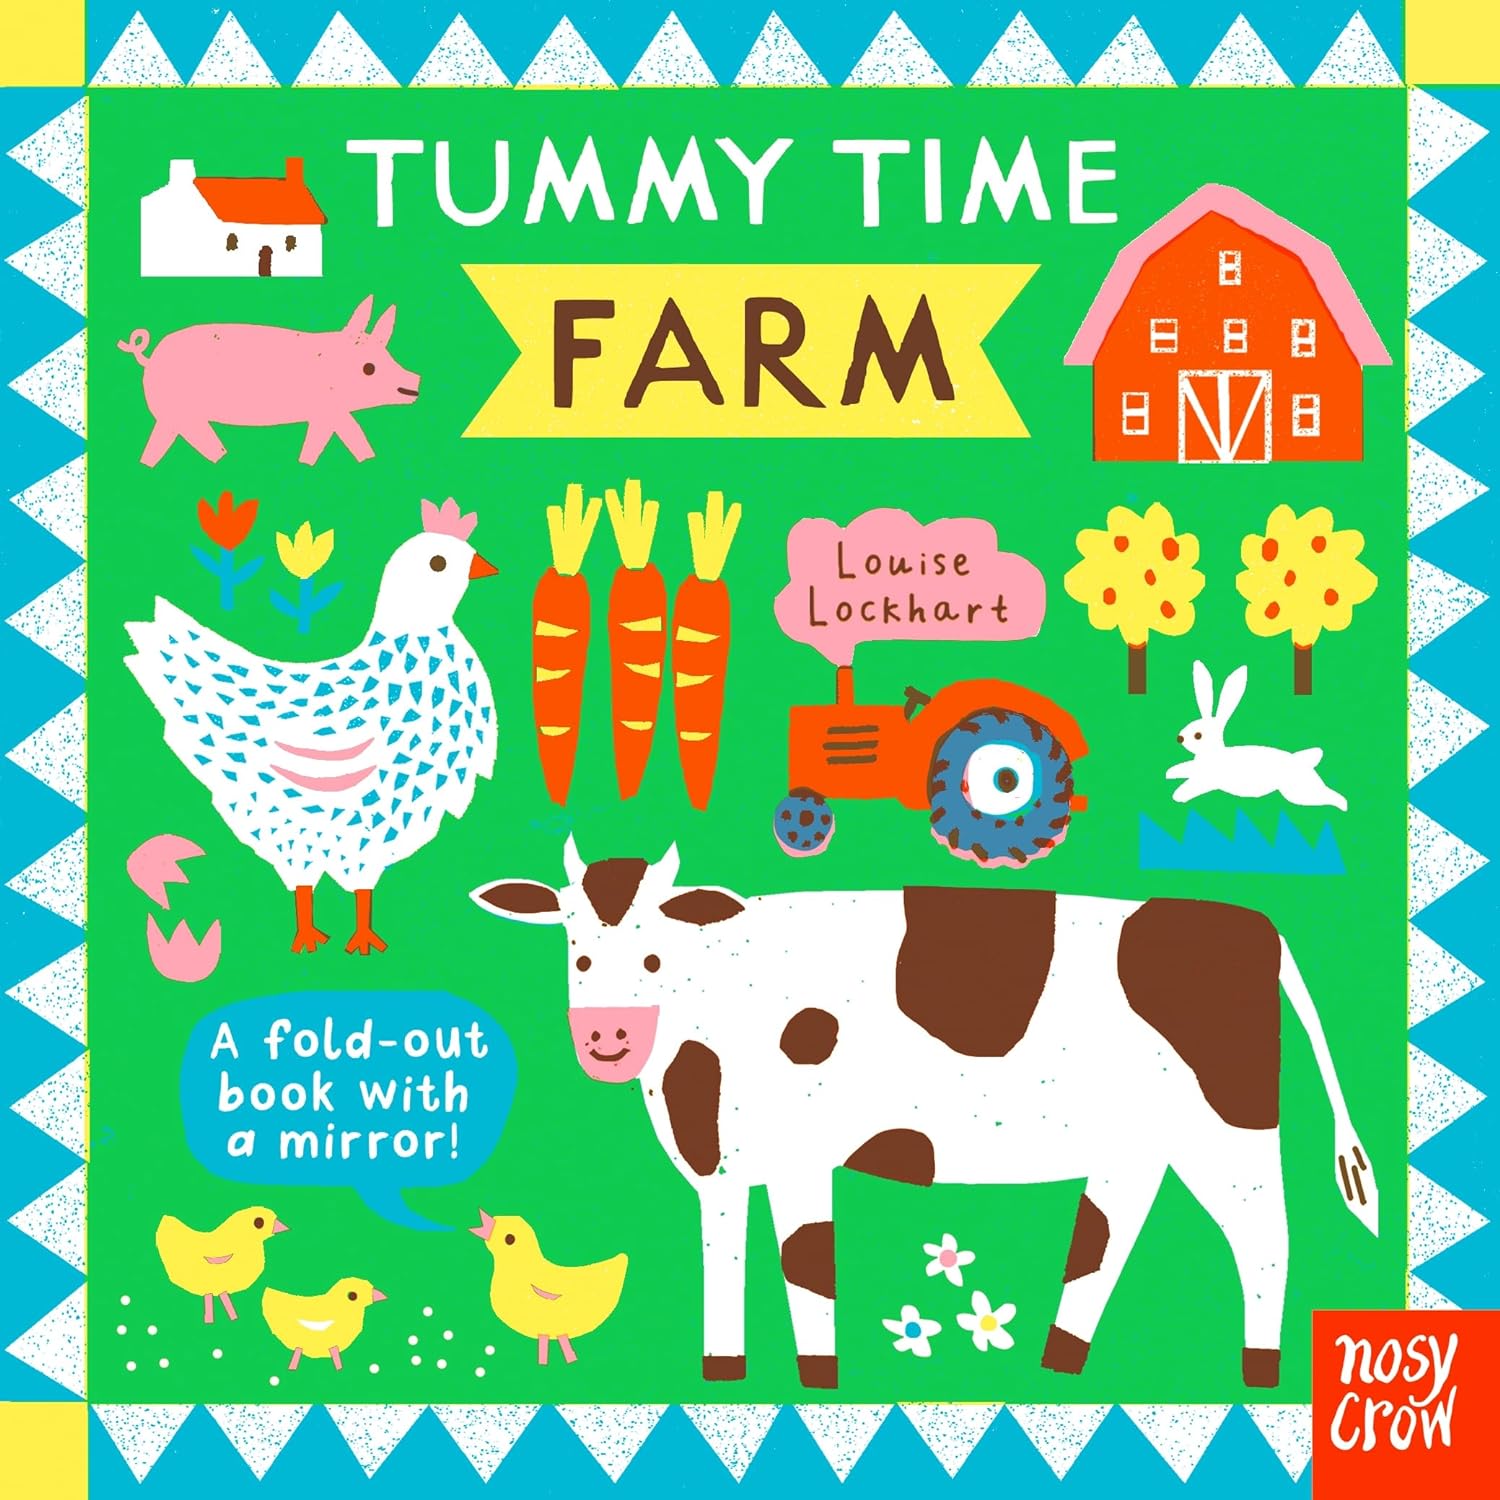 Tummy Time Farm: A Fold-Out Book With a Mirror!